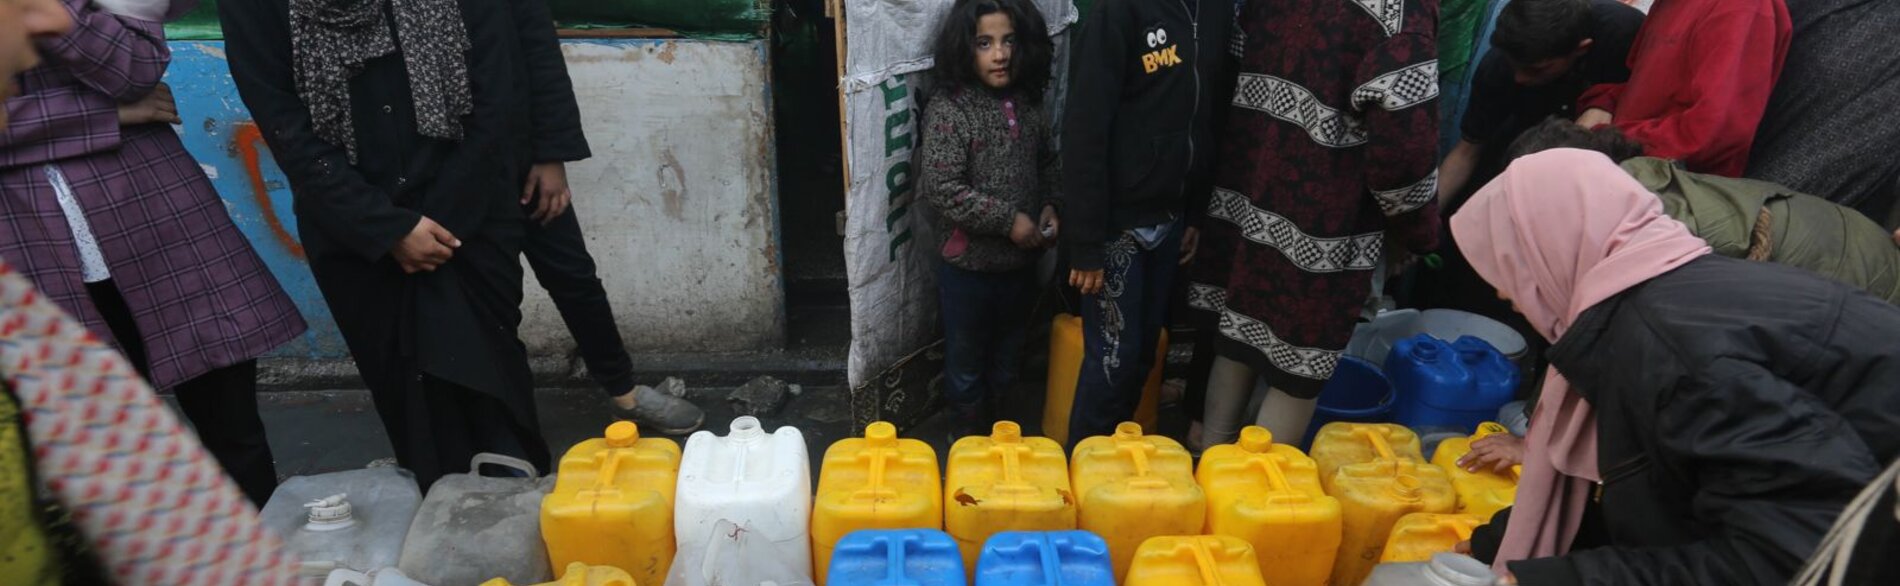 Four in every five households in Gaza lack access to safe and clean water, UNICEF reports. According to a recent assessment, displaced people have access to only two litres of water per person per day, well below the recommended minimum standard of 15 litres. Photo by UNRWA